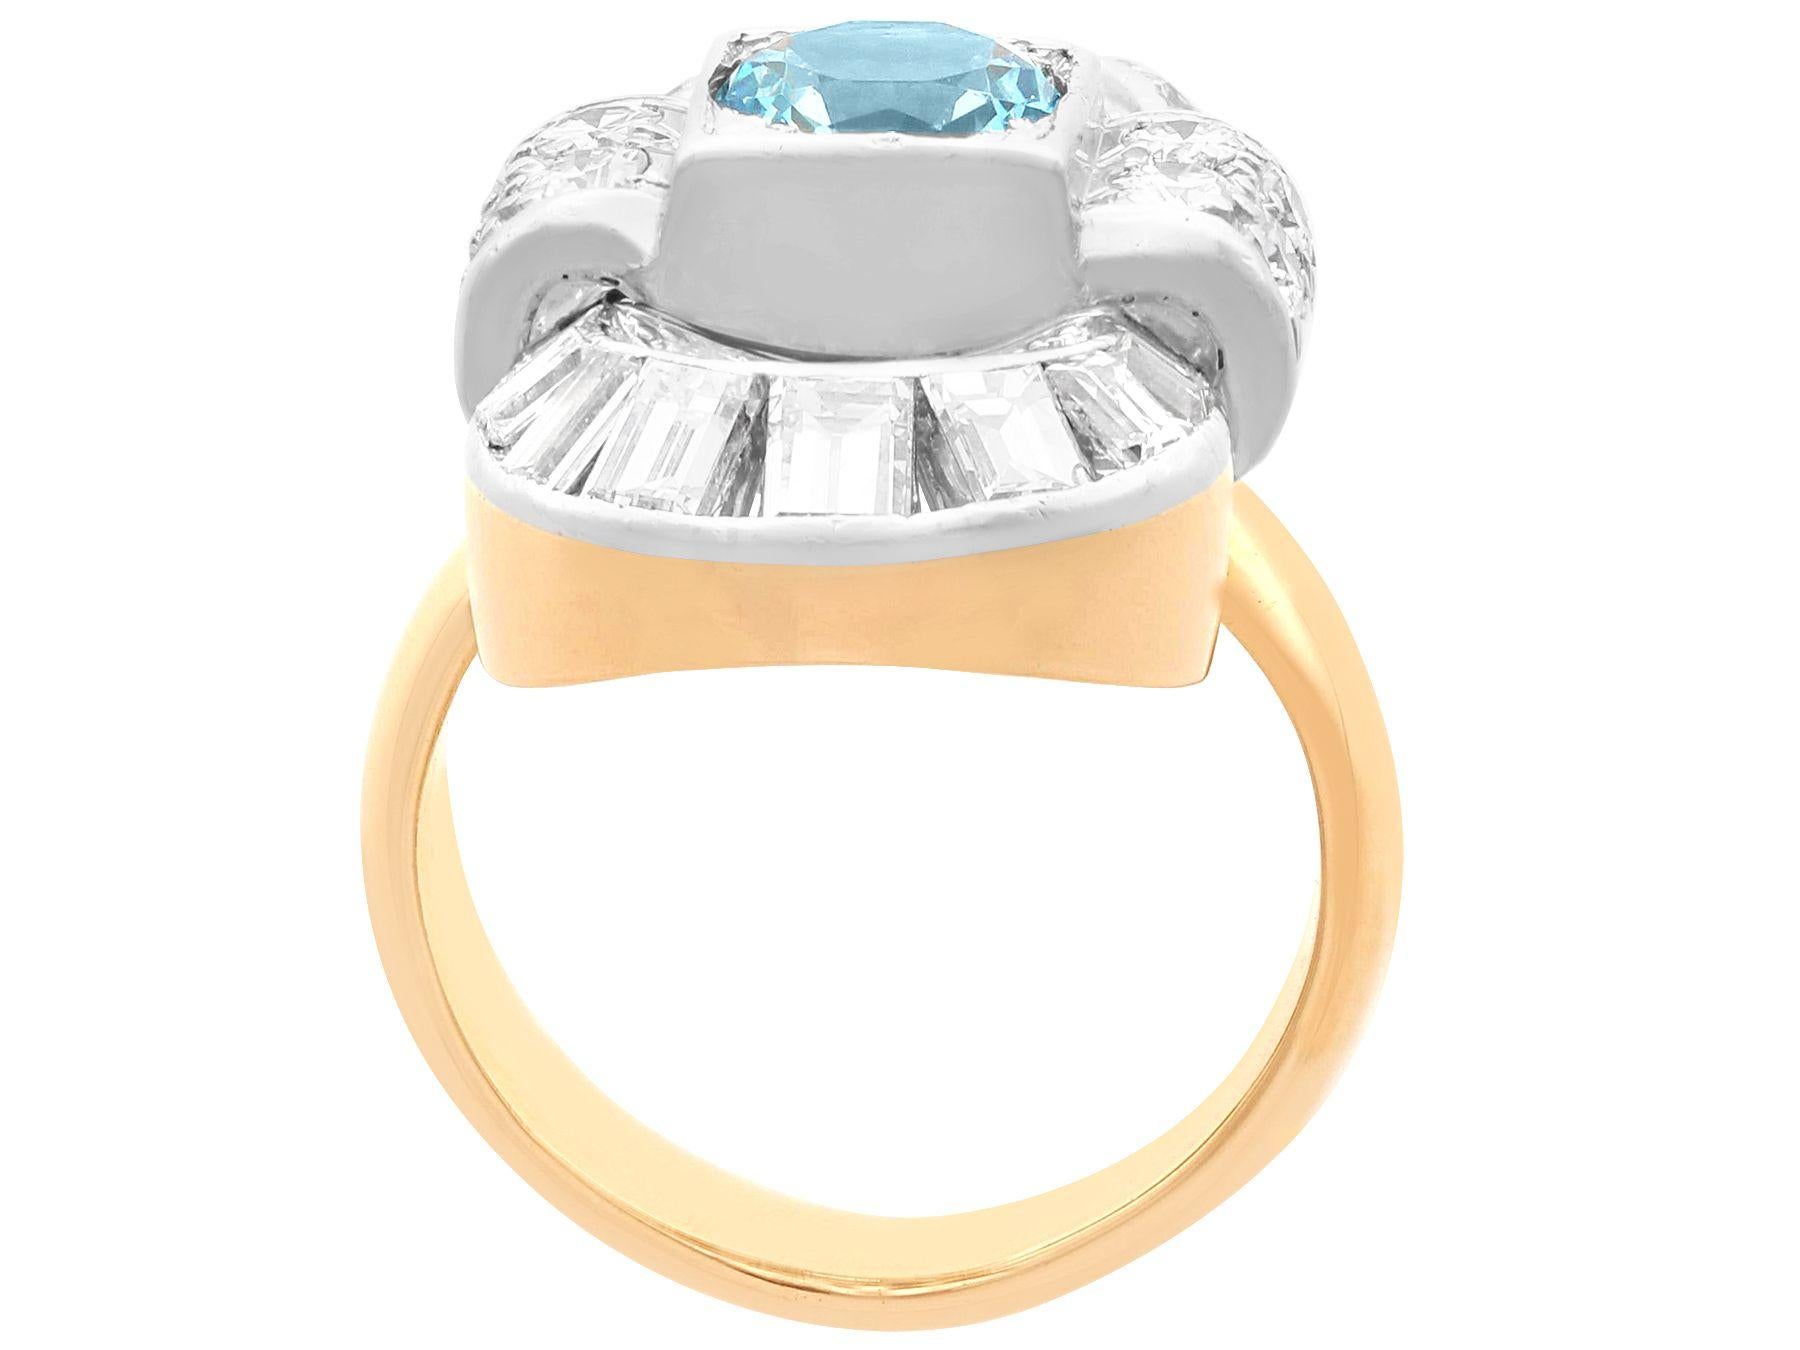 A stunning, fine and impressive 0.88 carat aquamarine and 2.02 carat diamond, 18 karat yellow gold and platinum set cluster ring; part of our diverse antique jewelry collections.

This stunning, fine and impressive Art Deco ring has been crafted in